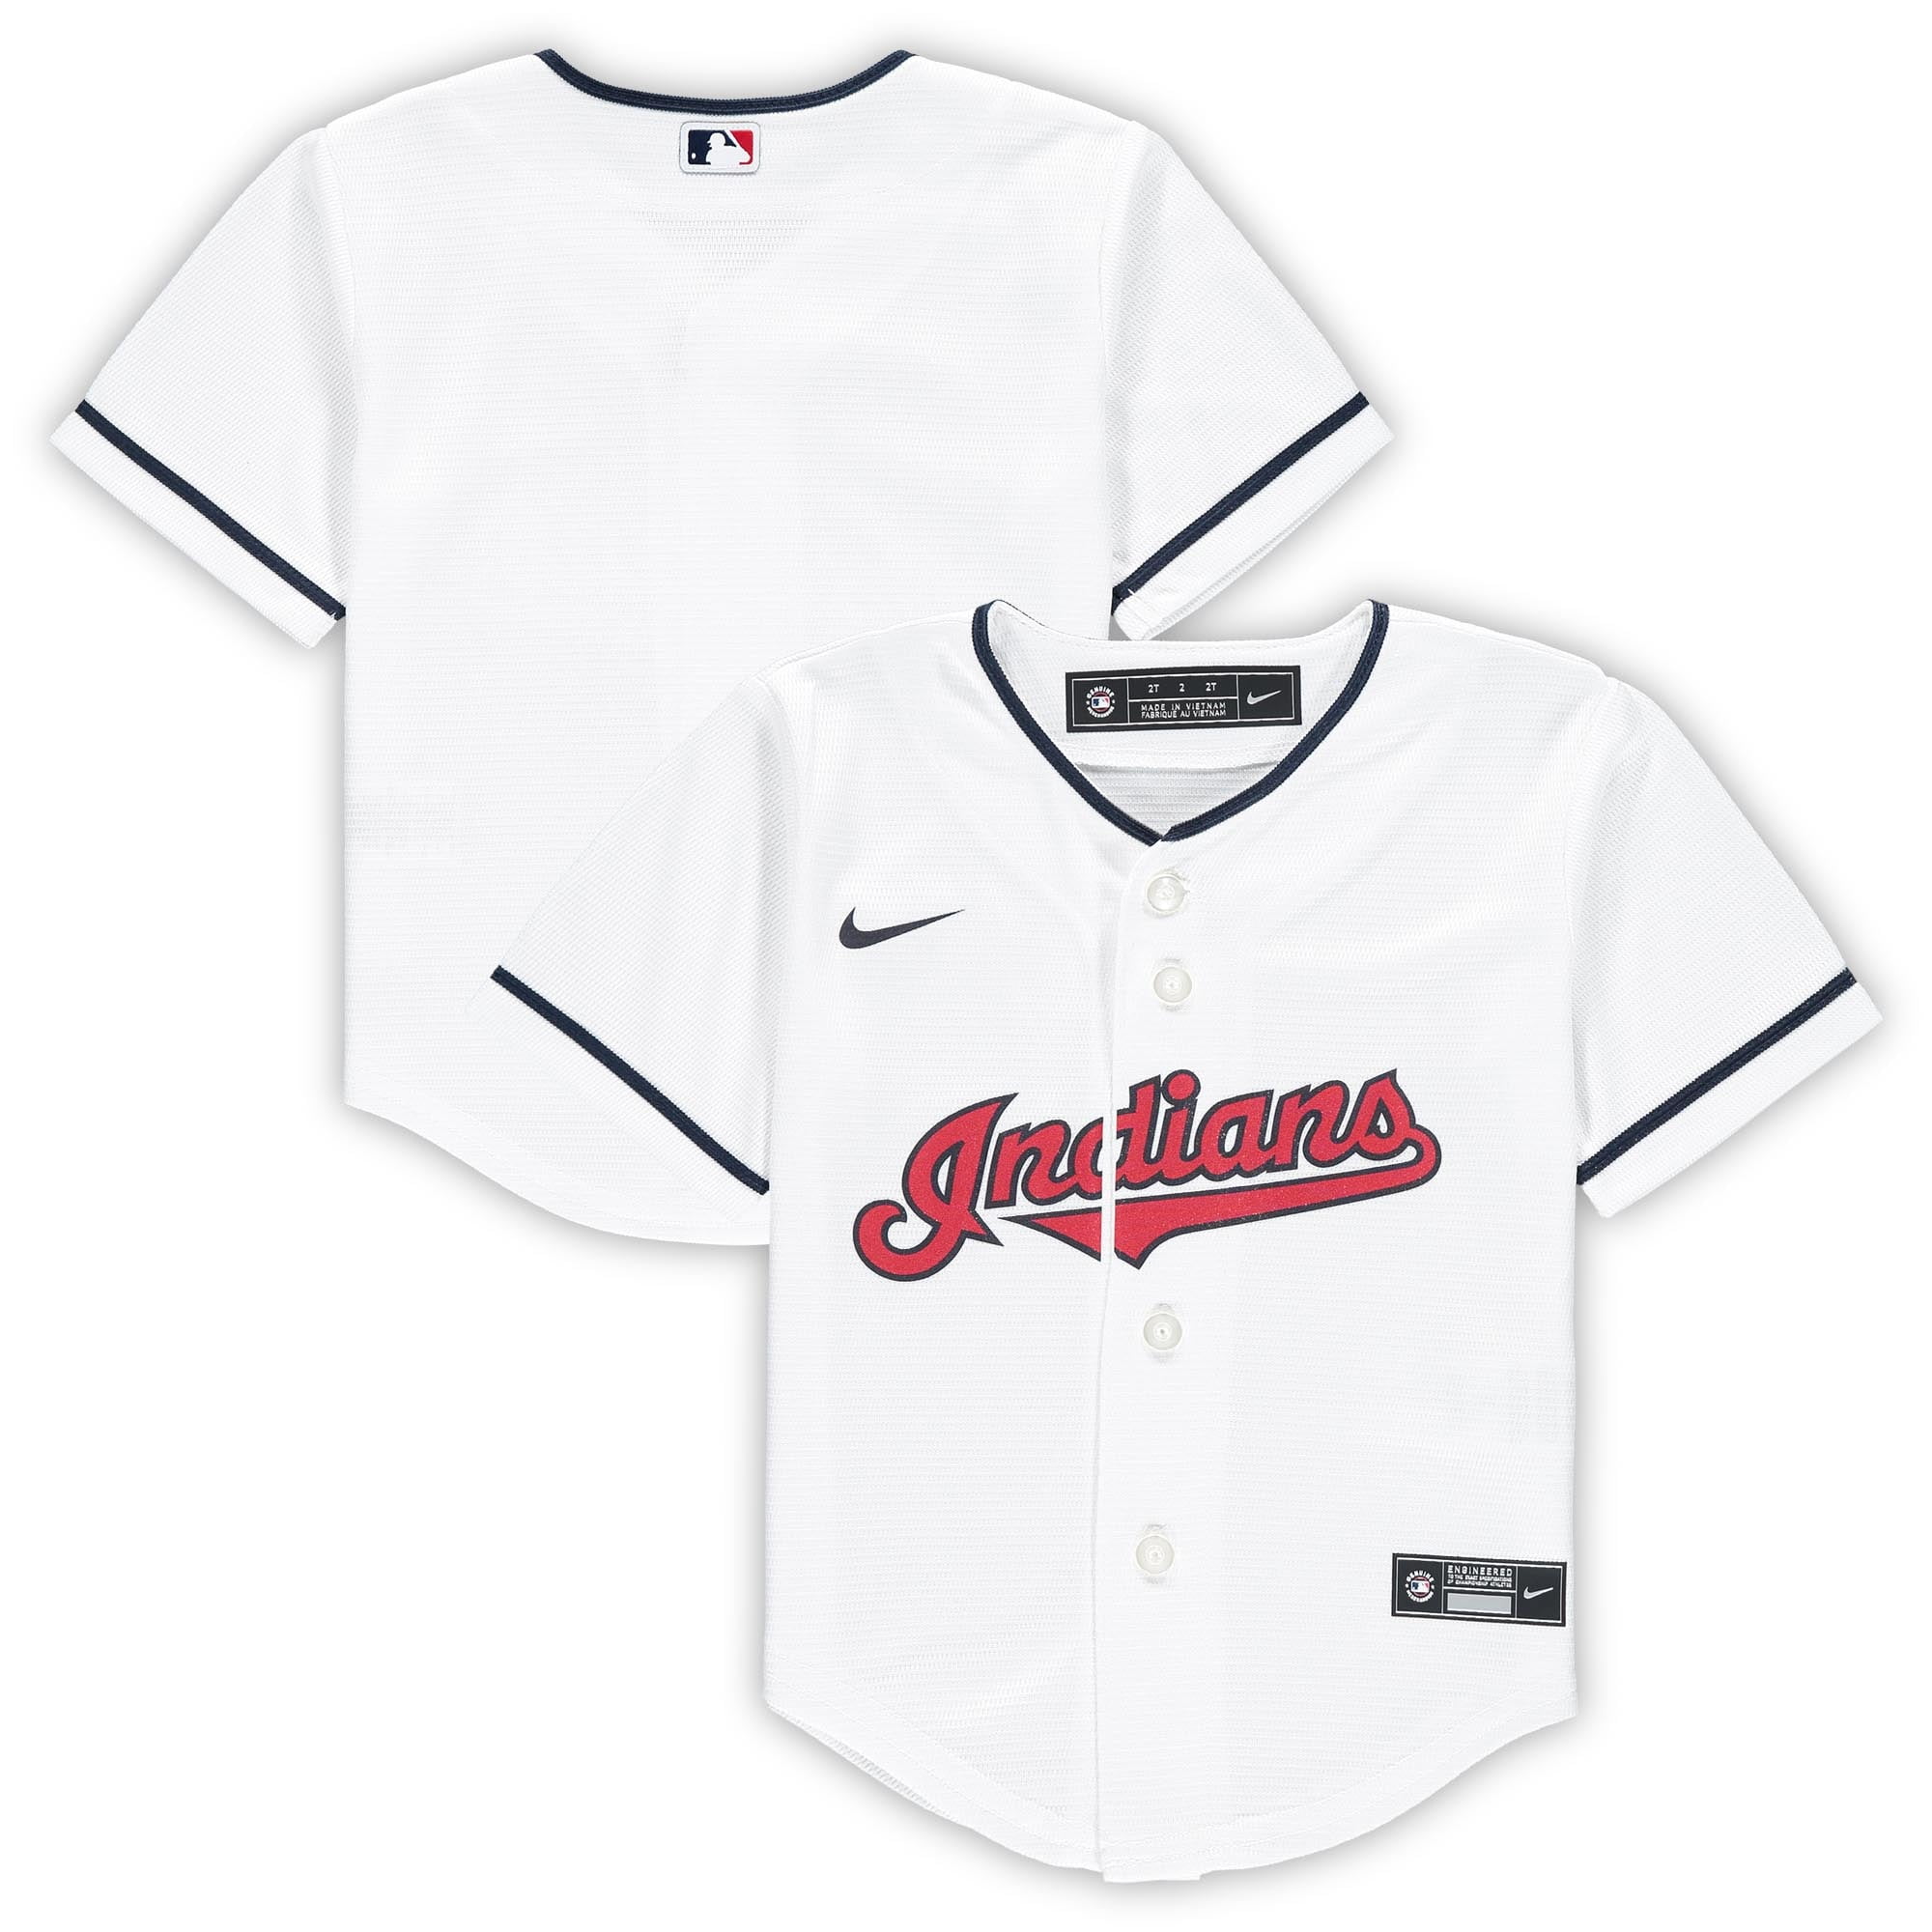 indians jersey white